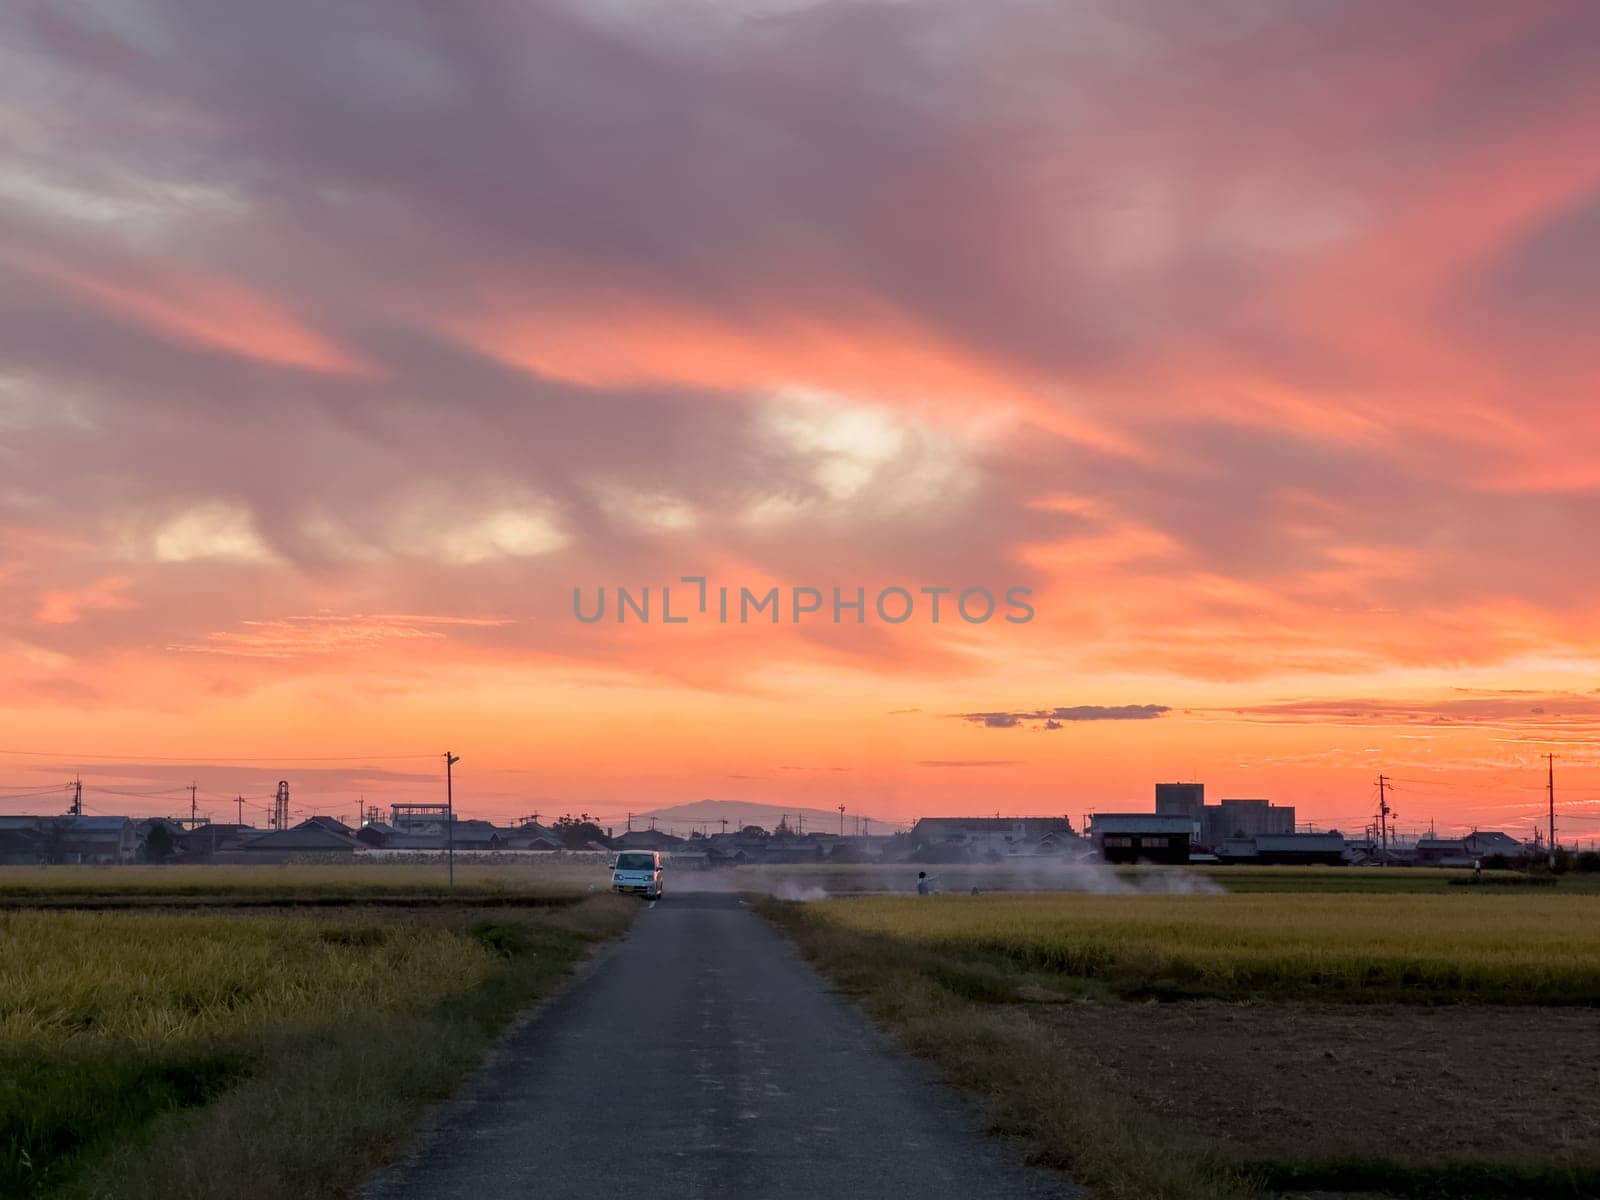 Country road by controlled burn in fields outside town at sunset by Osaze